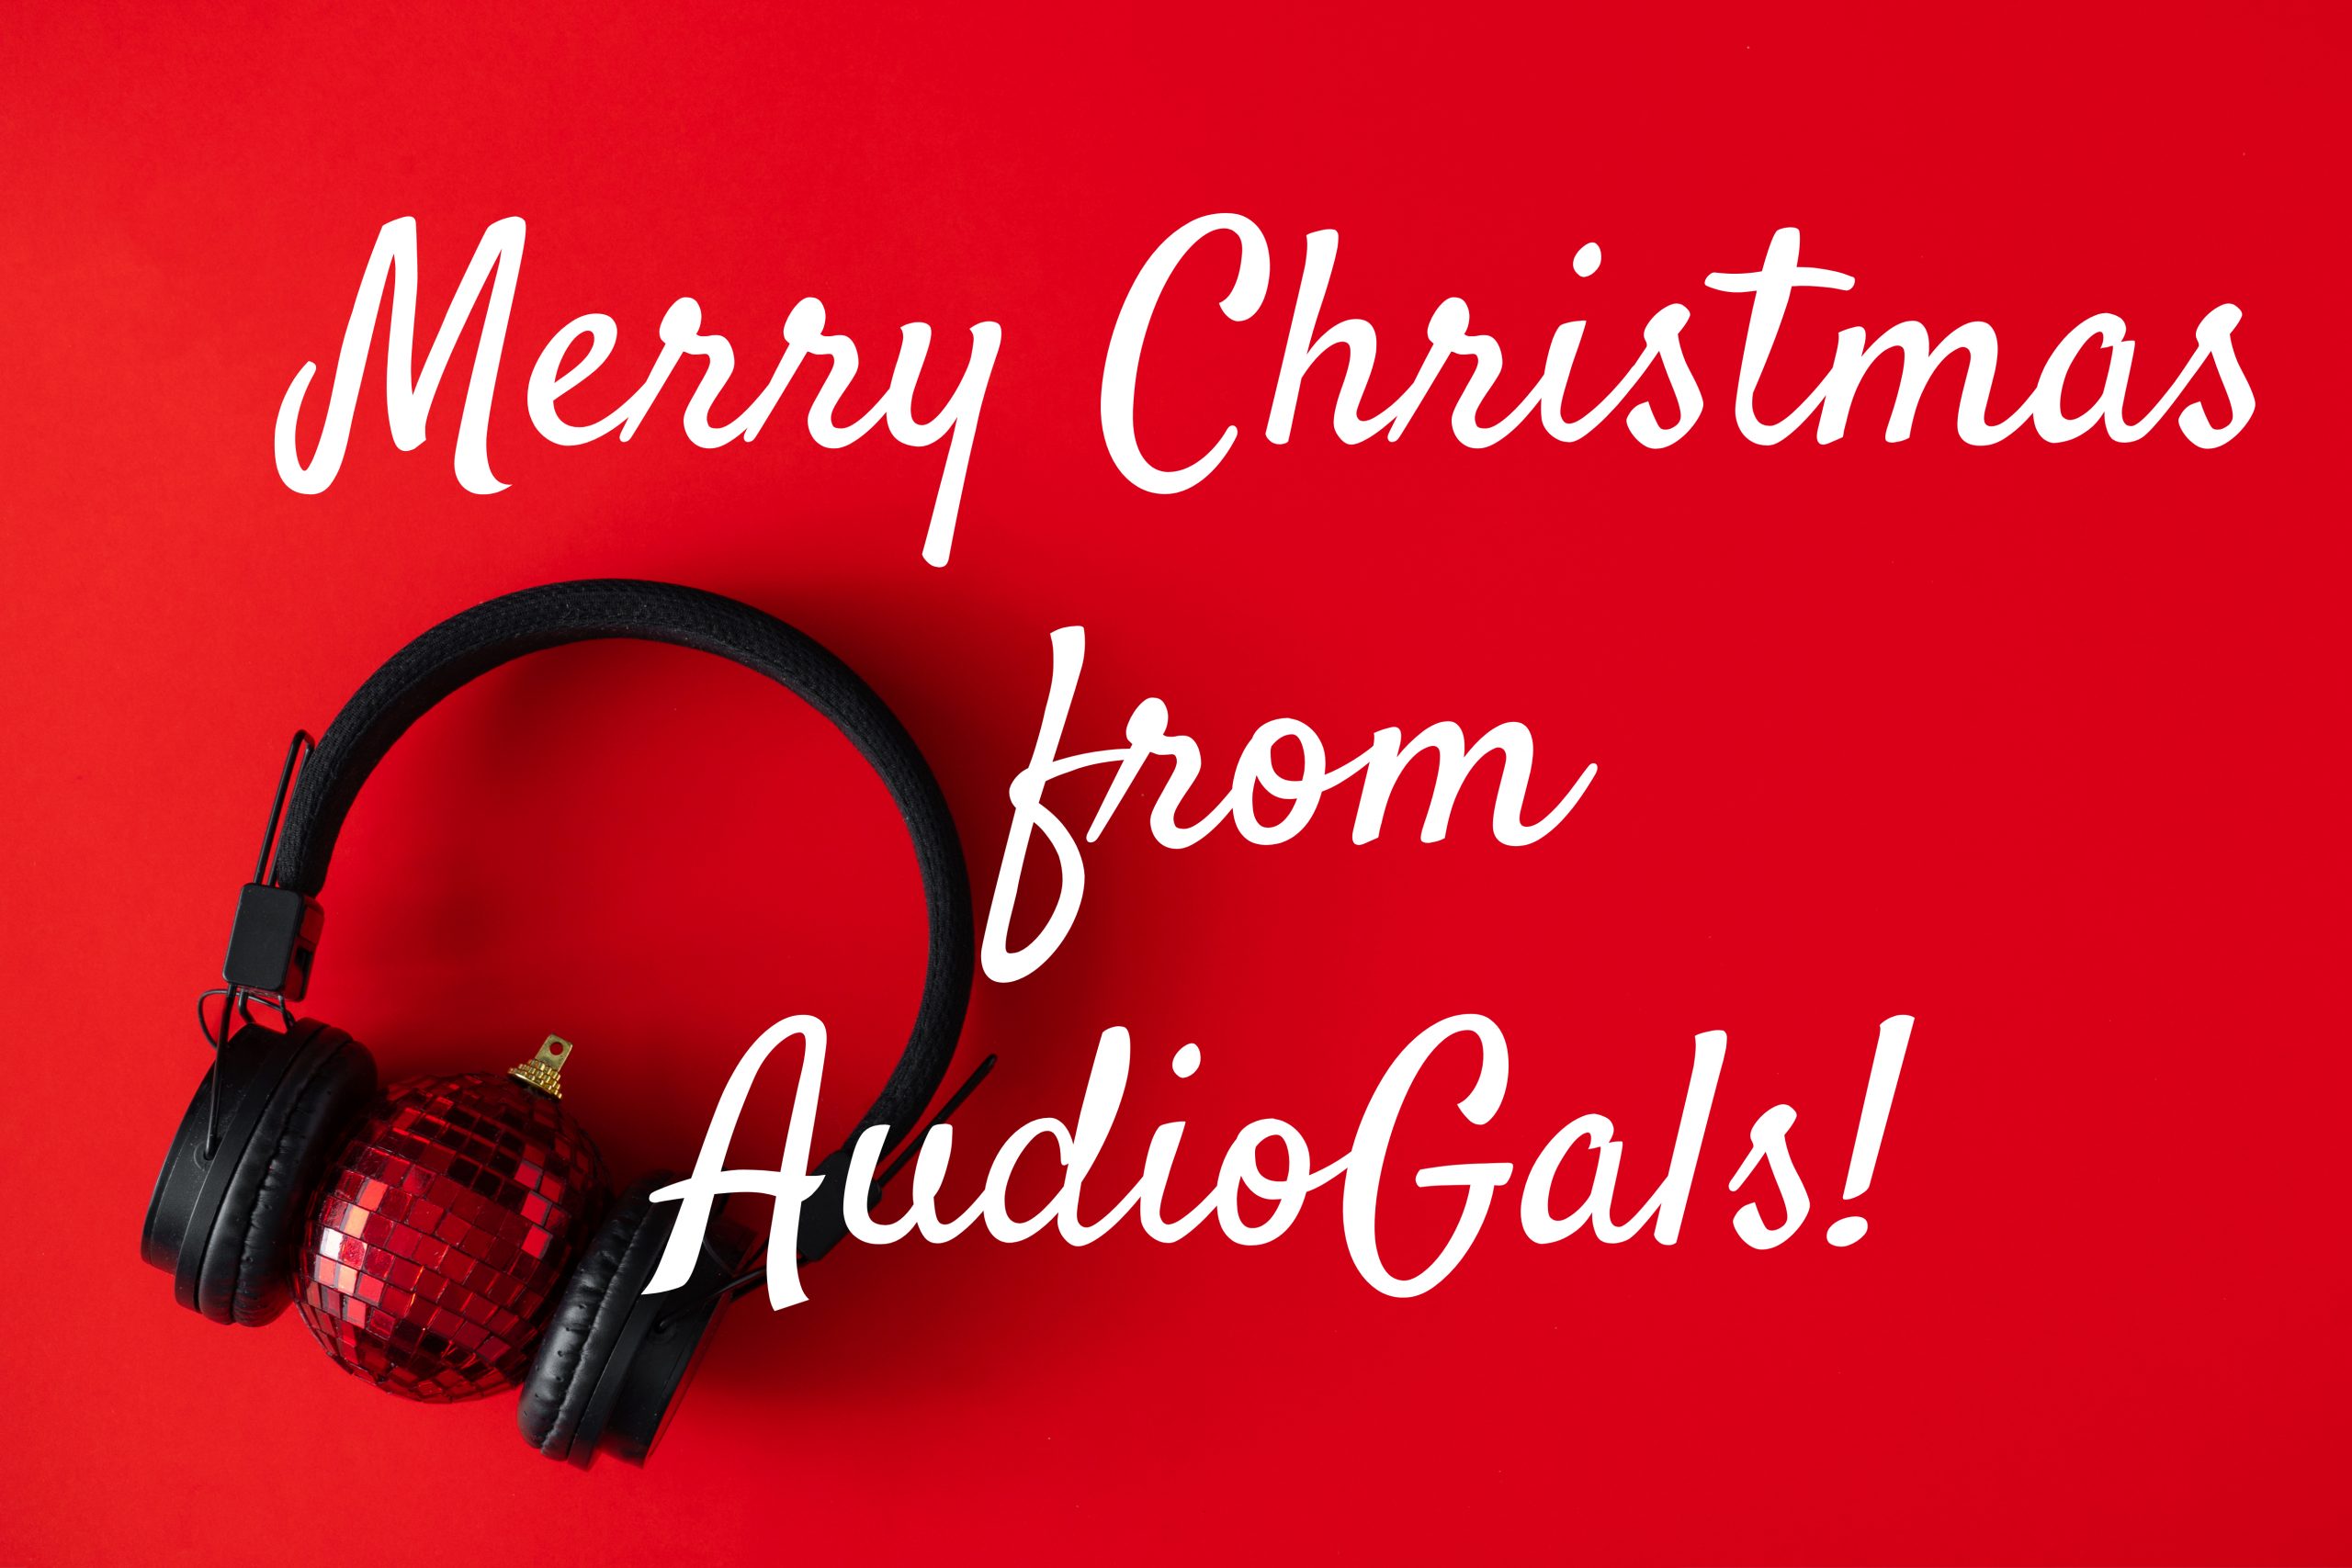 Merry Christmas from AudioGals